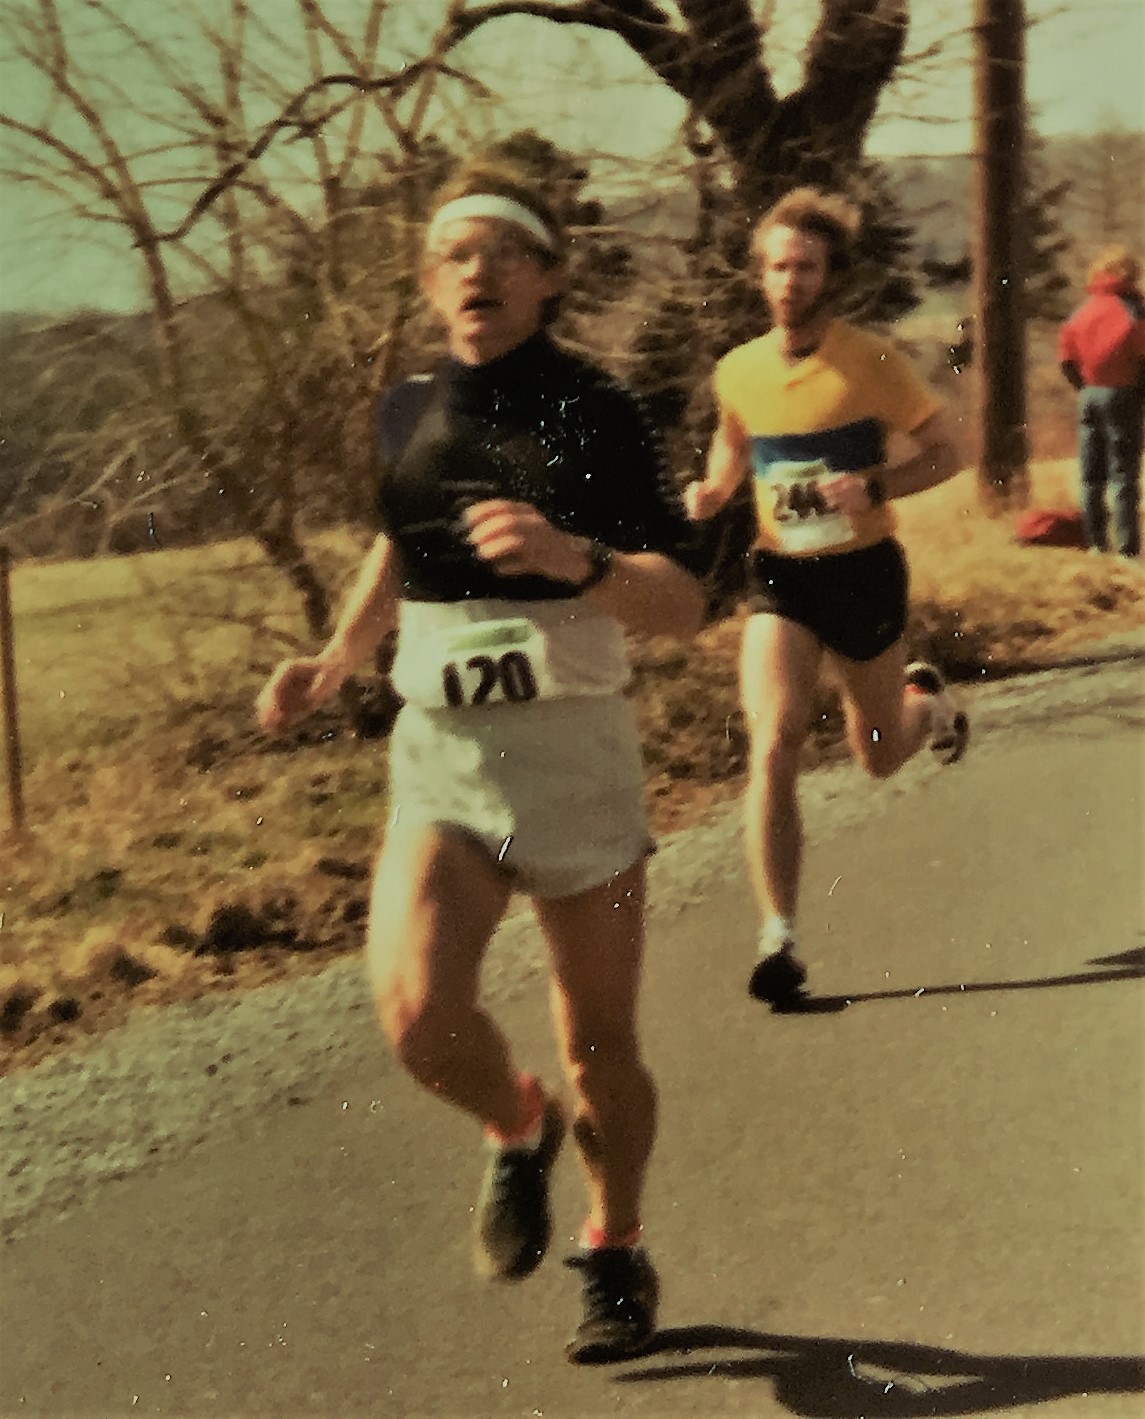 FASTER IN THE PAST:  Tim O’Keefe, A Competitor at Every Distance